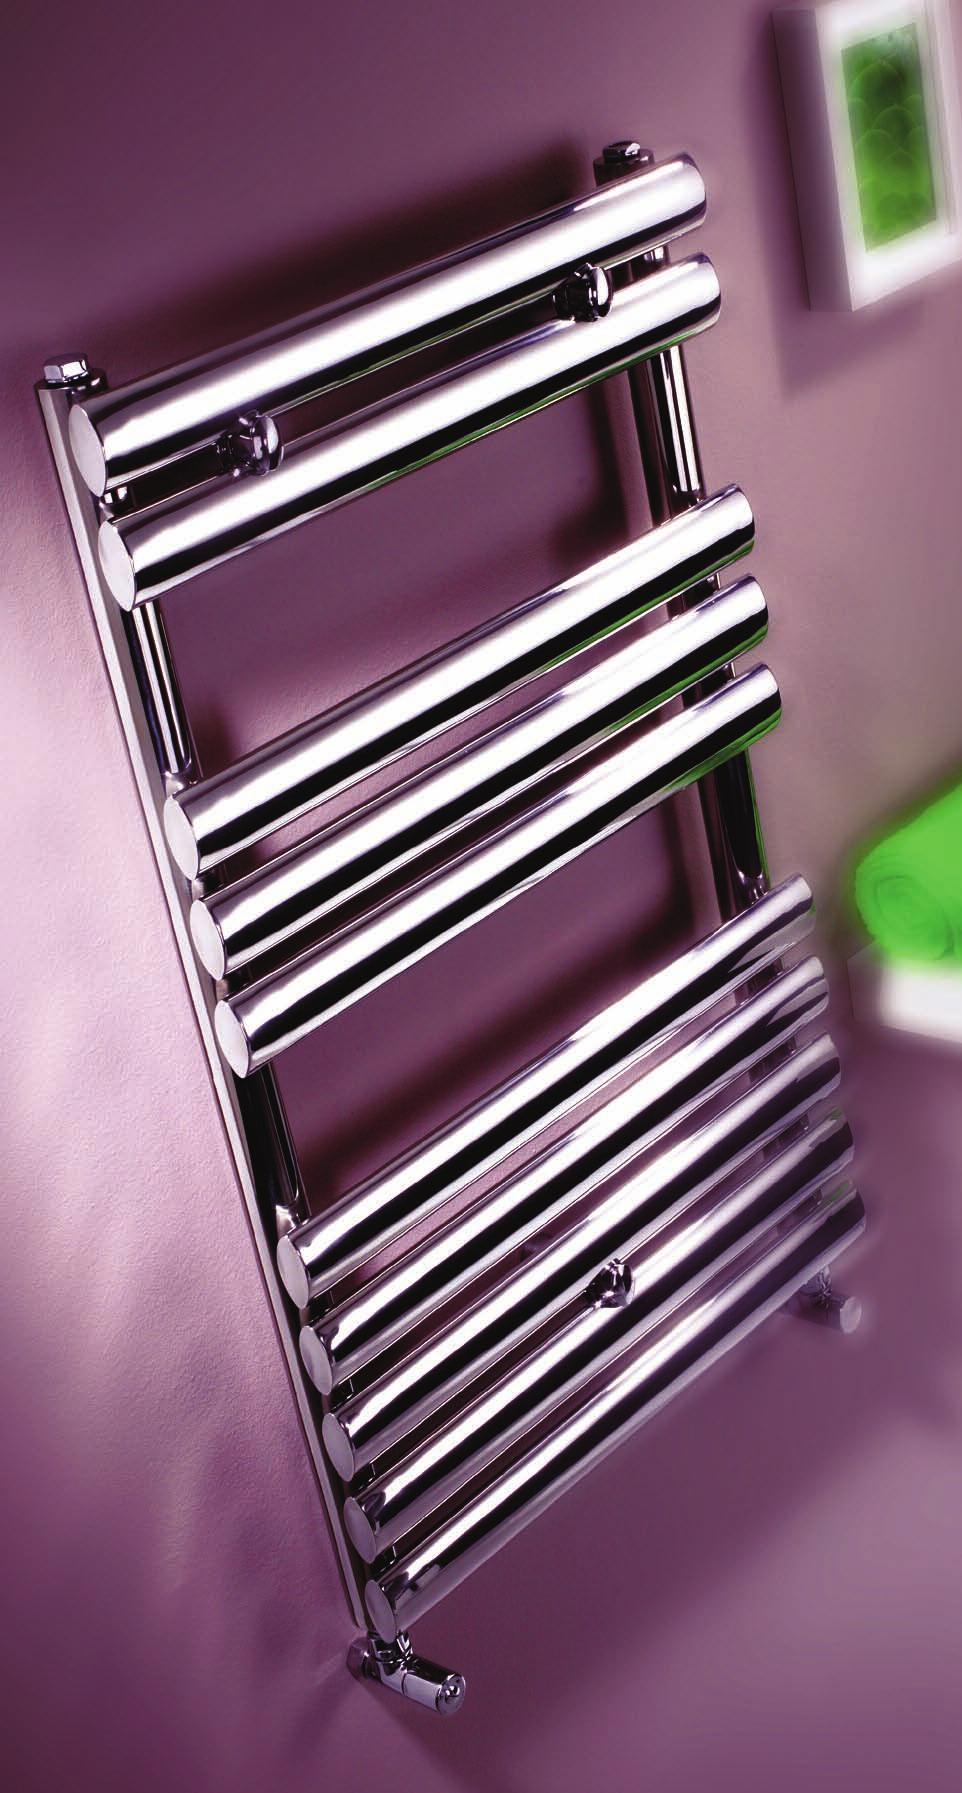 189 Oval 2 POL & BR 20 YEARS electric options available The Oval profile of the stainless steel tubes gives this towel rail a modern and sophisticated look.